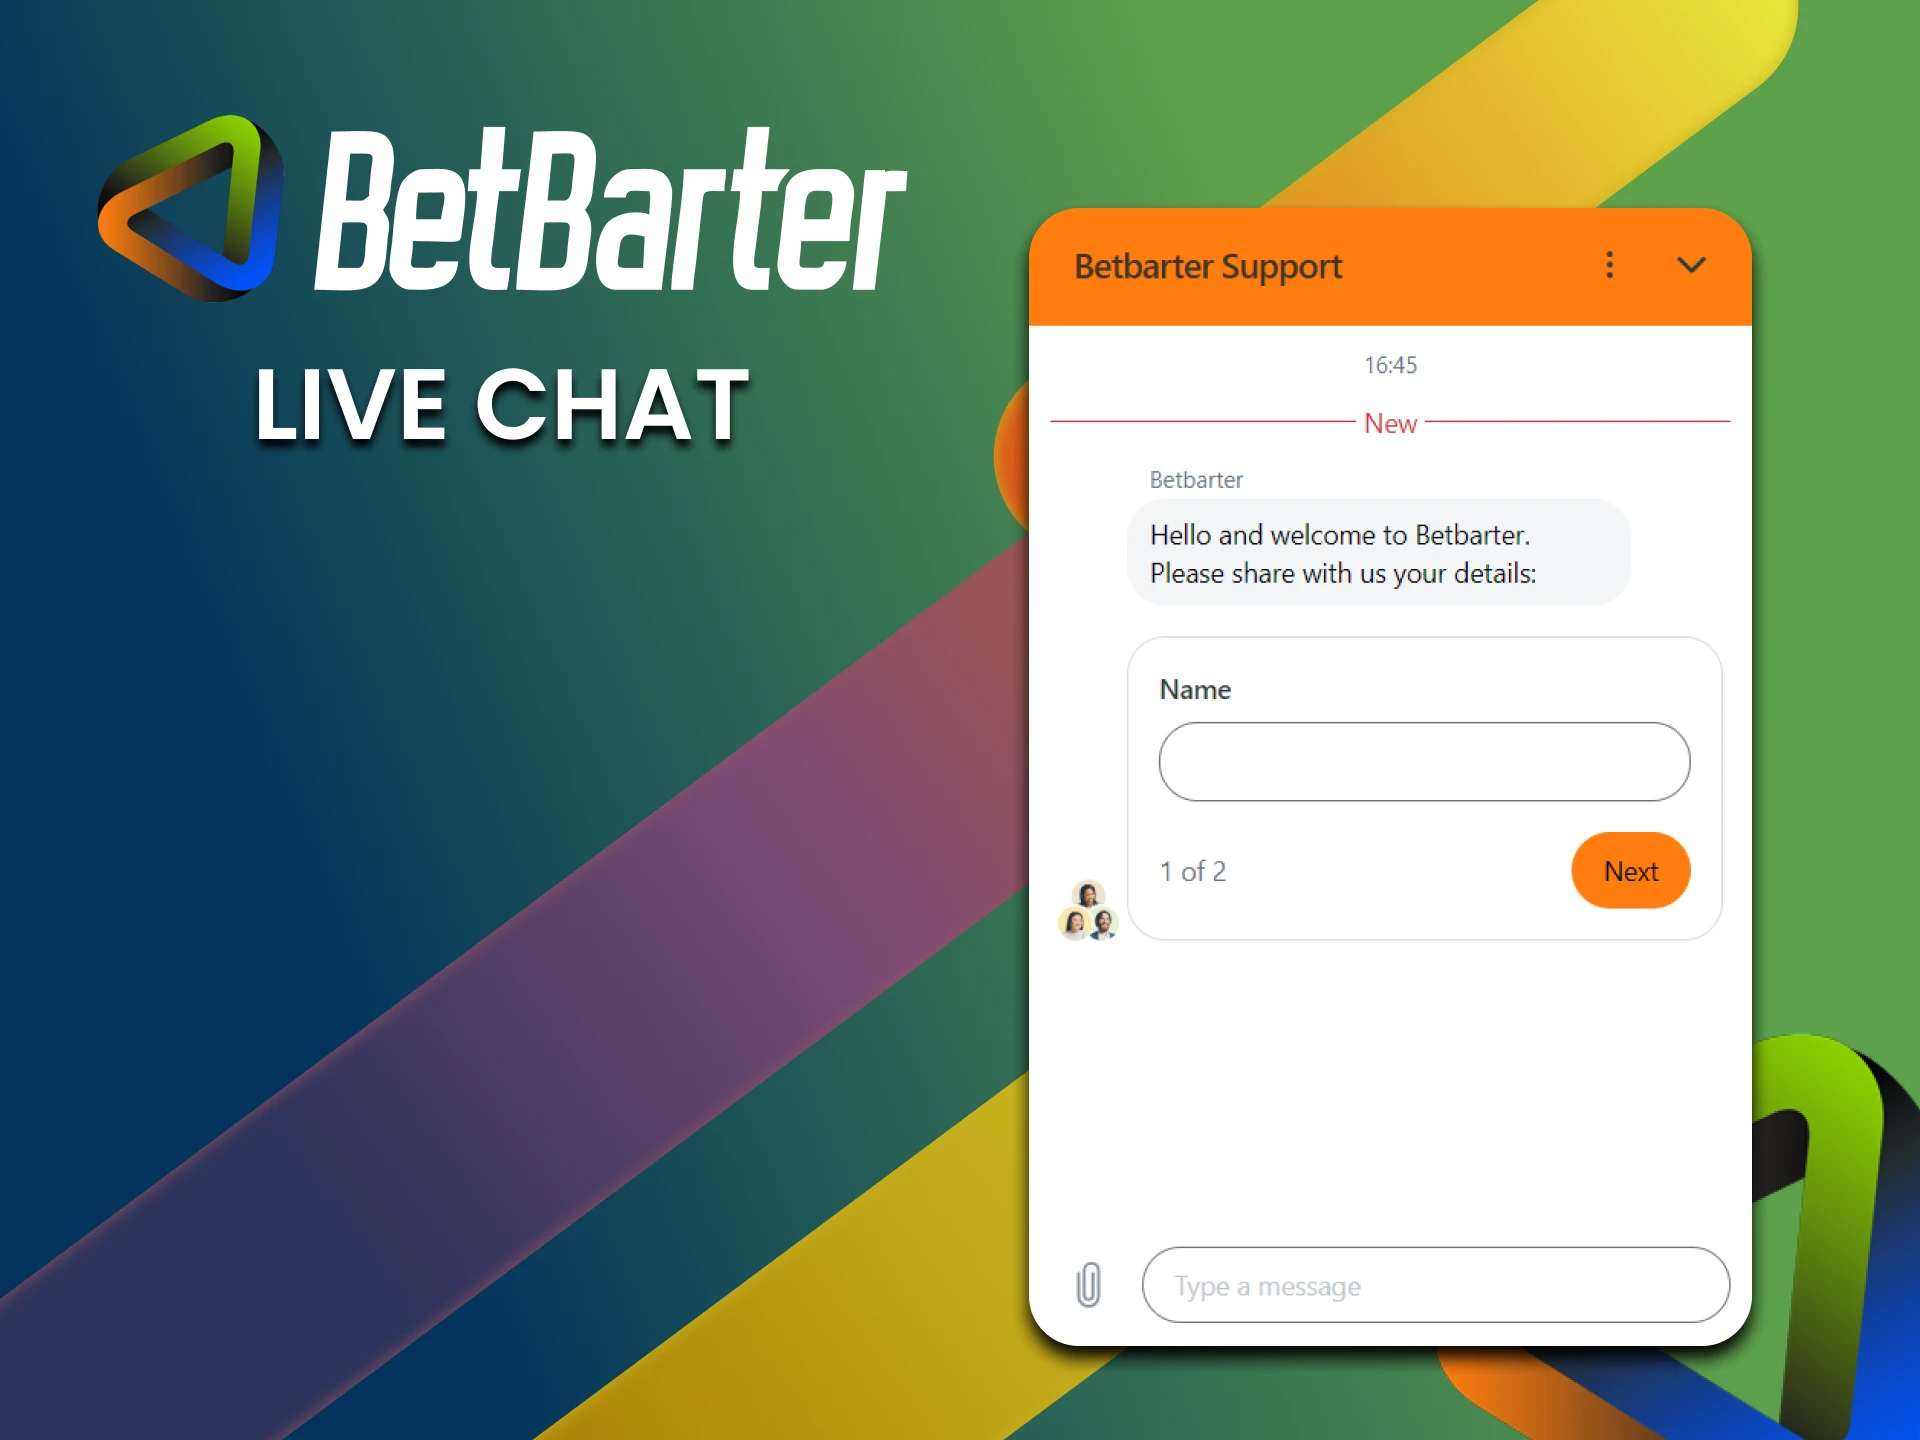 You can contact the BetBarter support team via live chat.